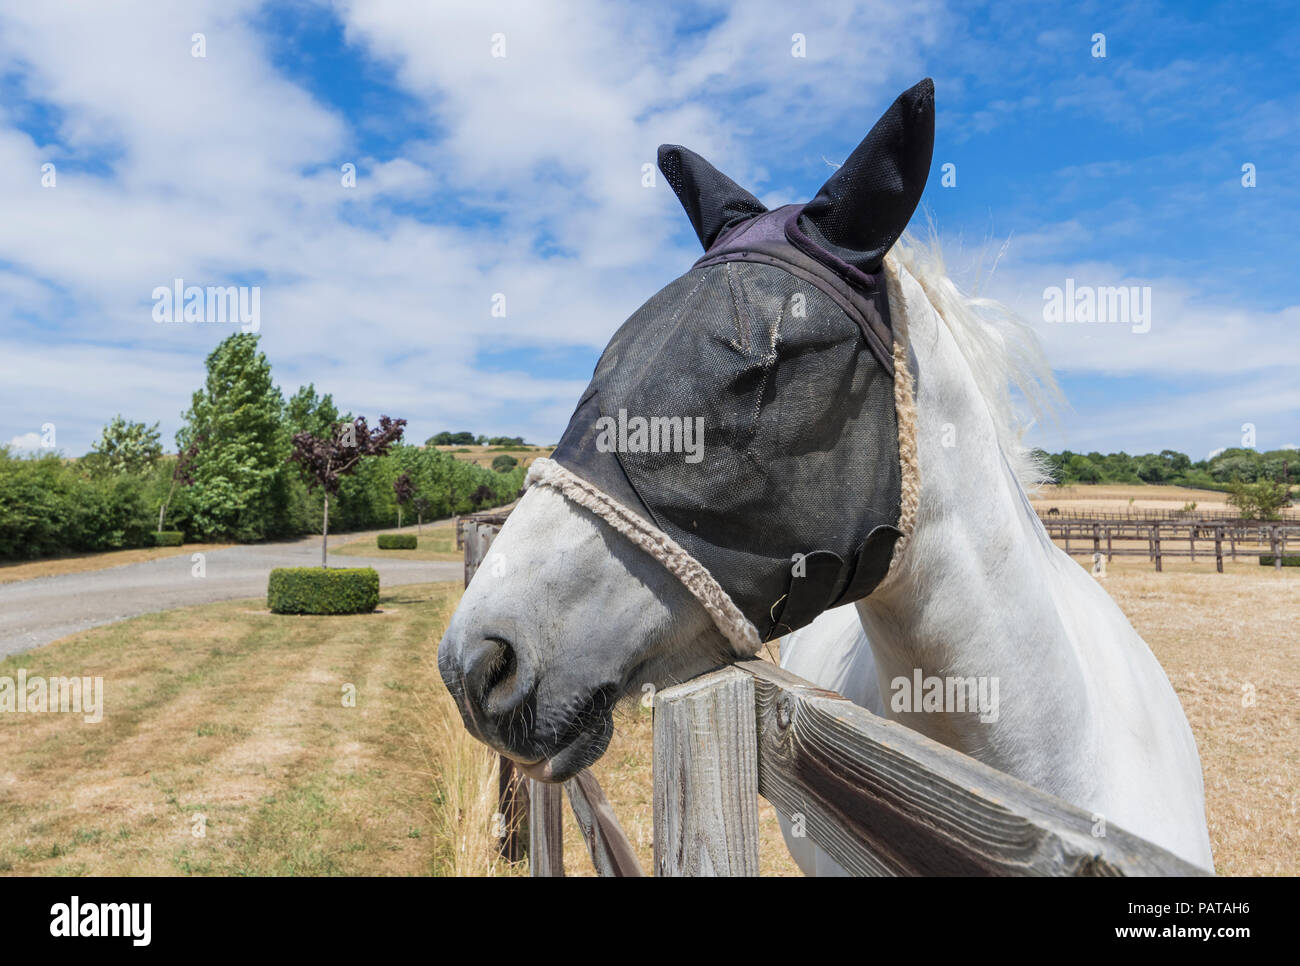 White horse in Summer looking over a fence, wearing a mesh fly veil protection mask on its head & ears to protect from flies, in the UK. Stock Photo